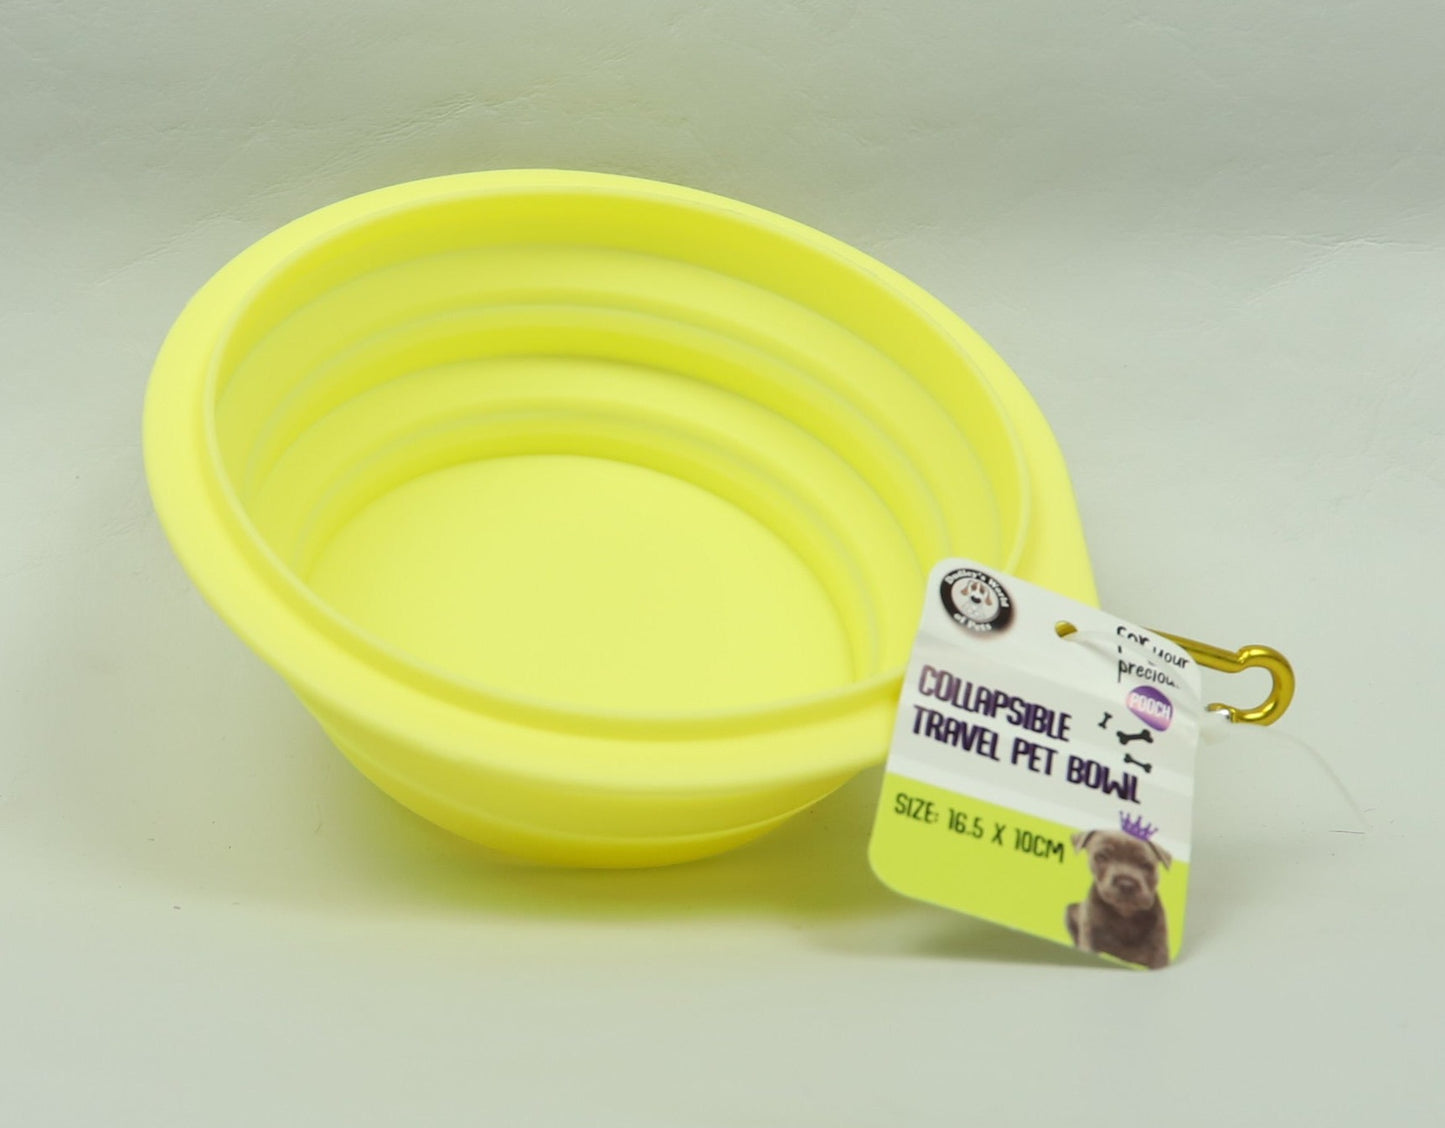 Collapsible Travel Pet Bowl- Yellow - 16.5 x 10cm